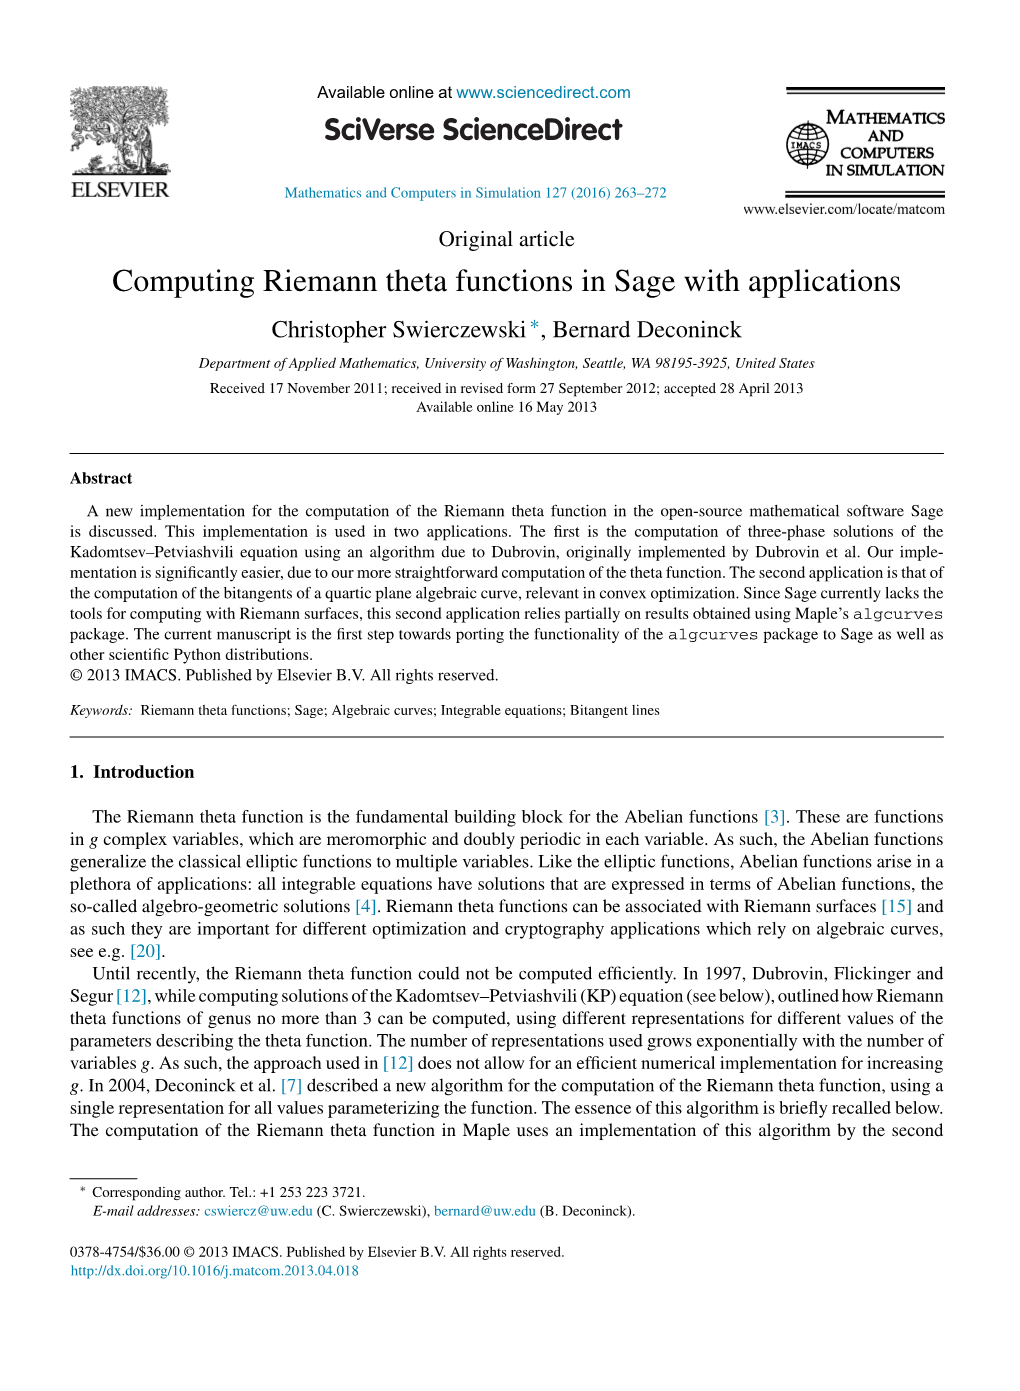 Computing Riemann Theta Functions in Sage with Applications